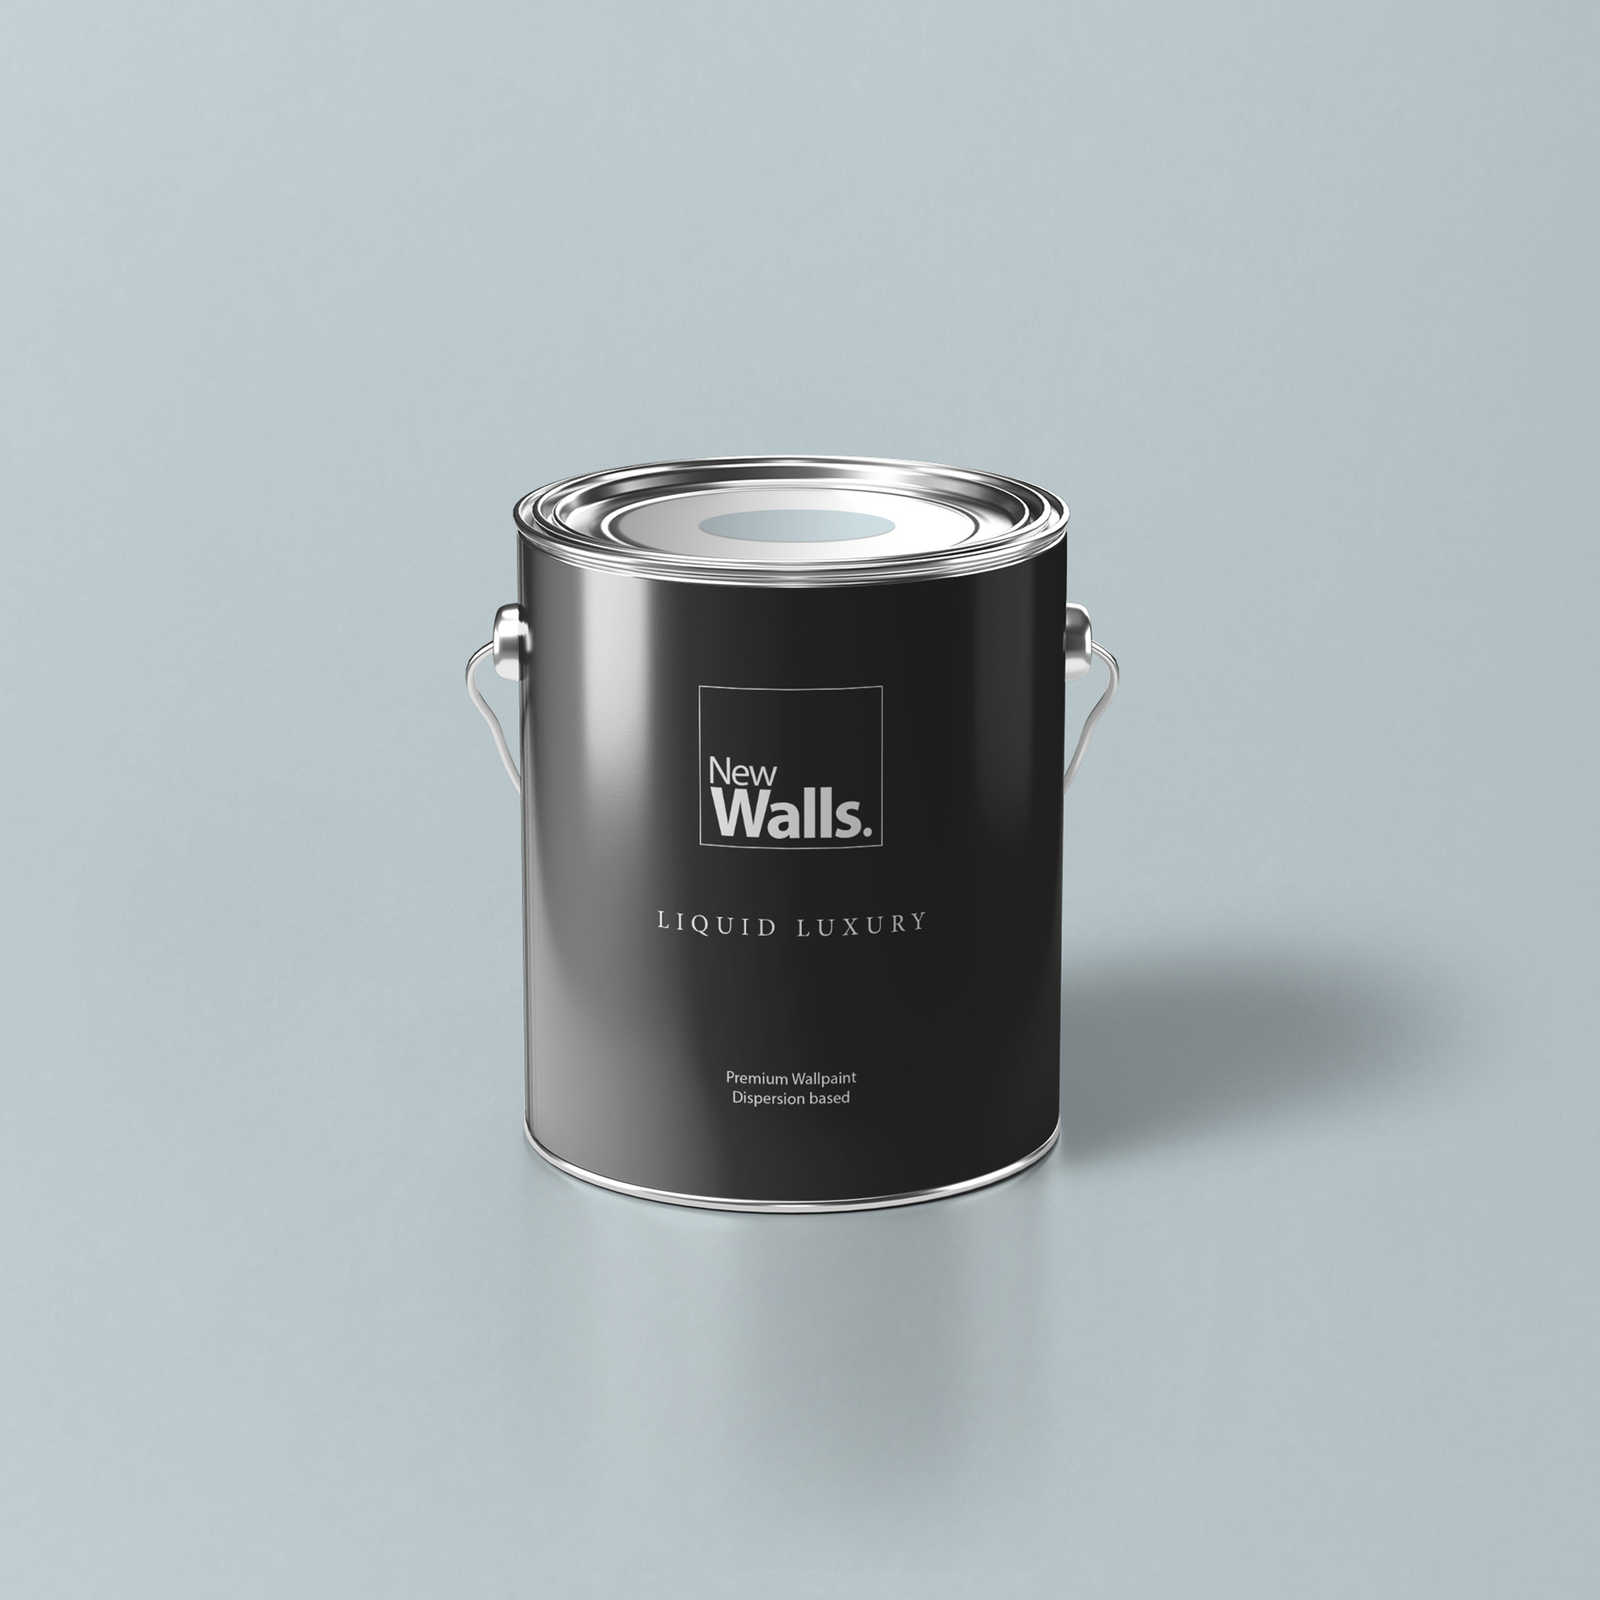 Premium Wall Paint Heavenly Blue Grey »Blissful Blue« NW300 – 2.5 litre
